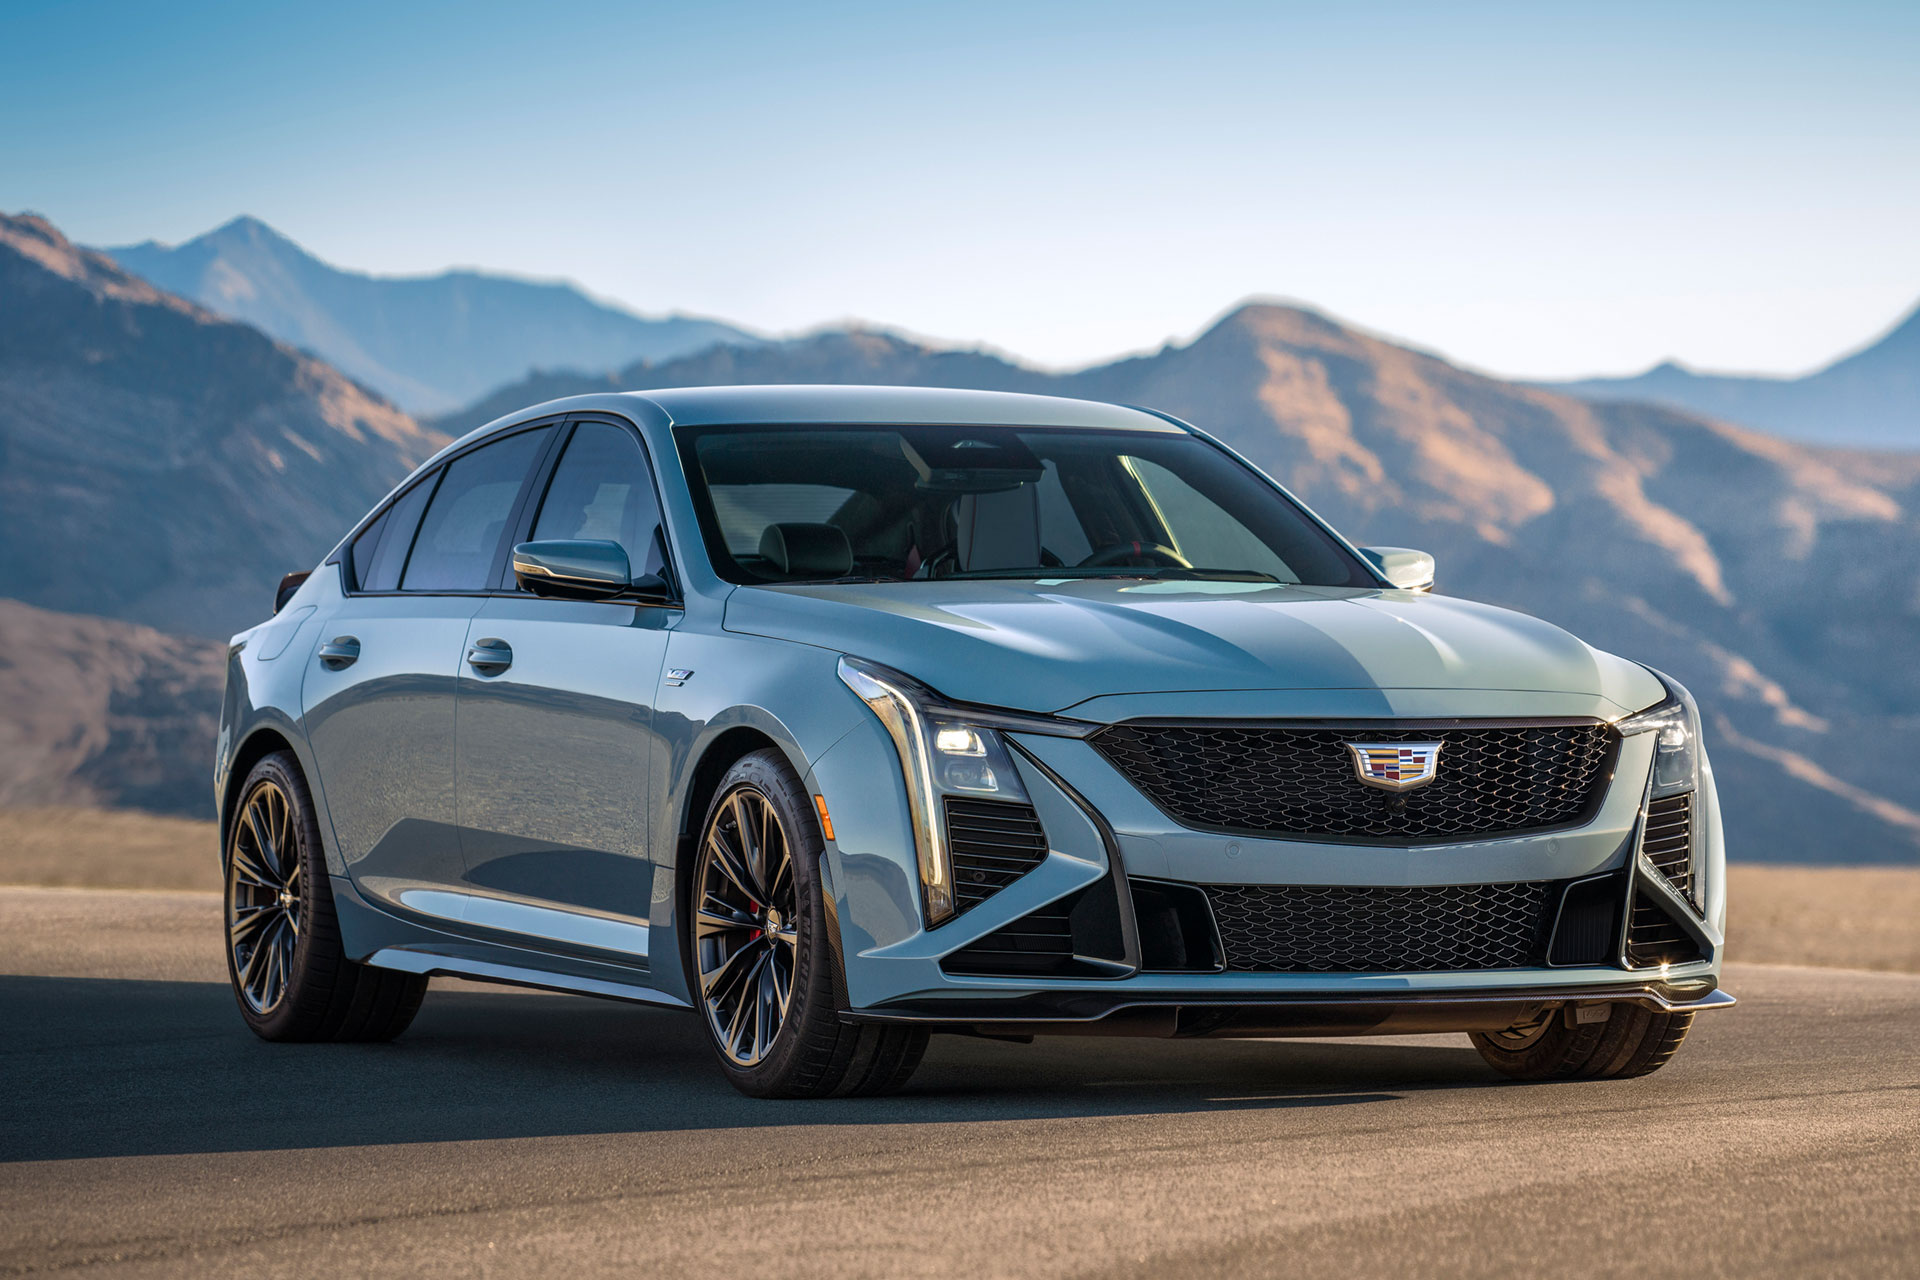 2025 Cadillac CT5-V Blackwing | Uncrate, #Cadillac #CT5V #Blackwing #Uncrate